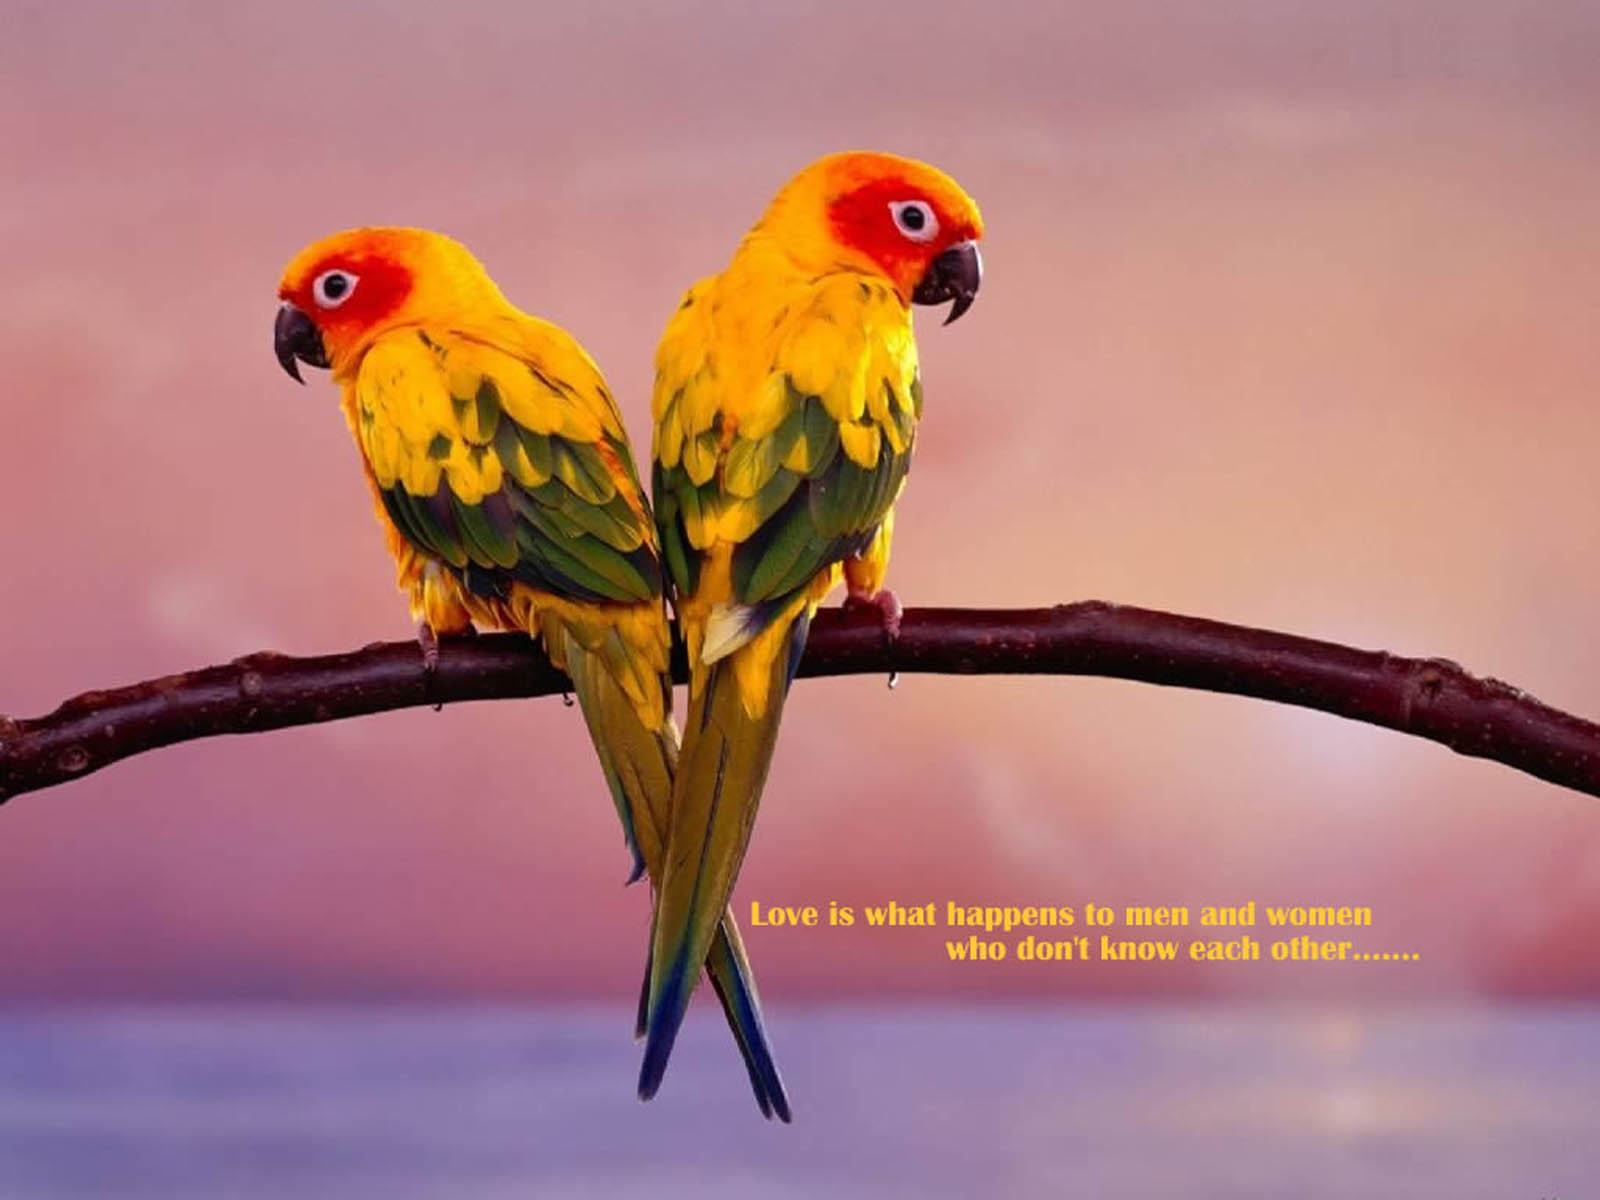 Tag: Love Birds Wallpapers, Backgrounds, Photos, Images and Pictures 